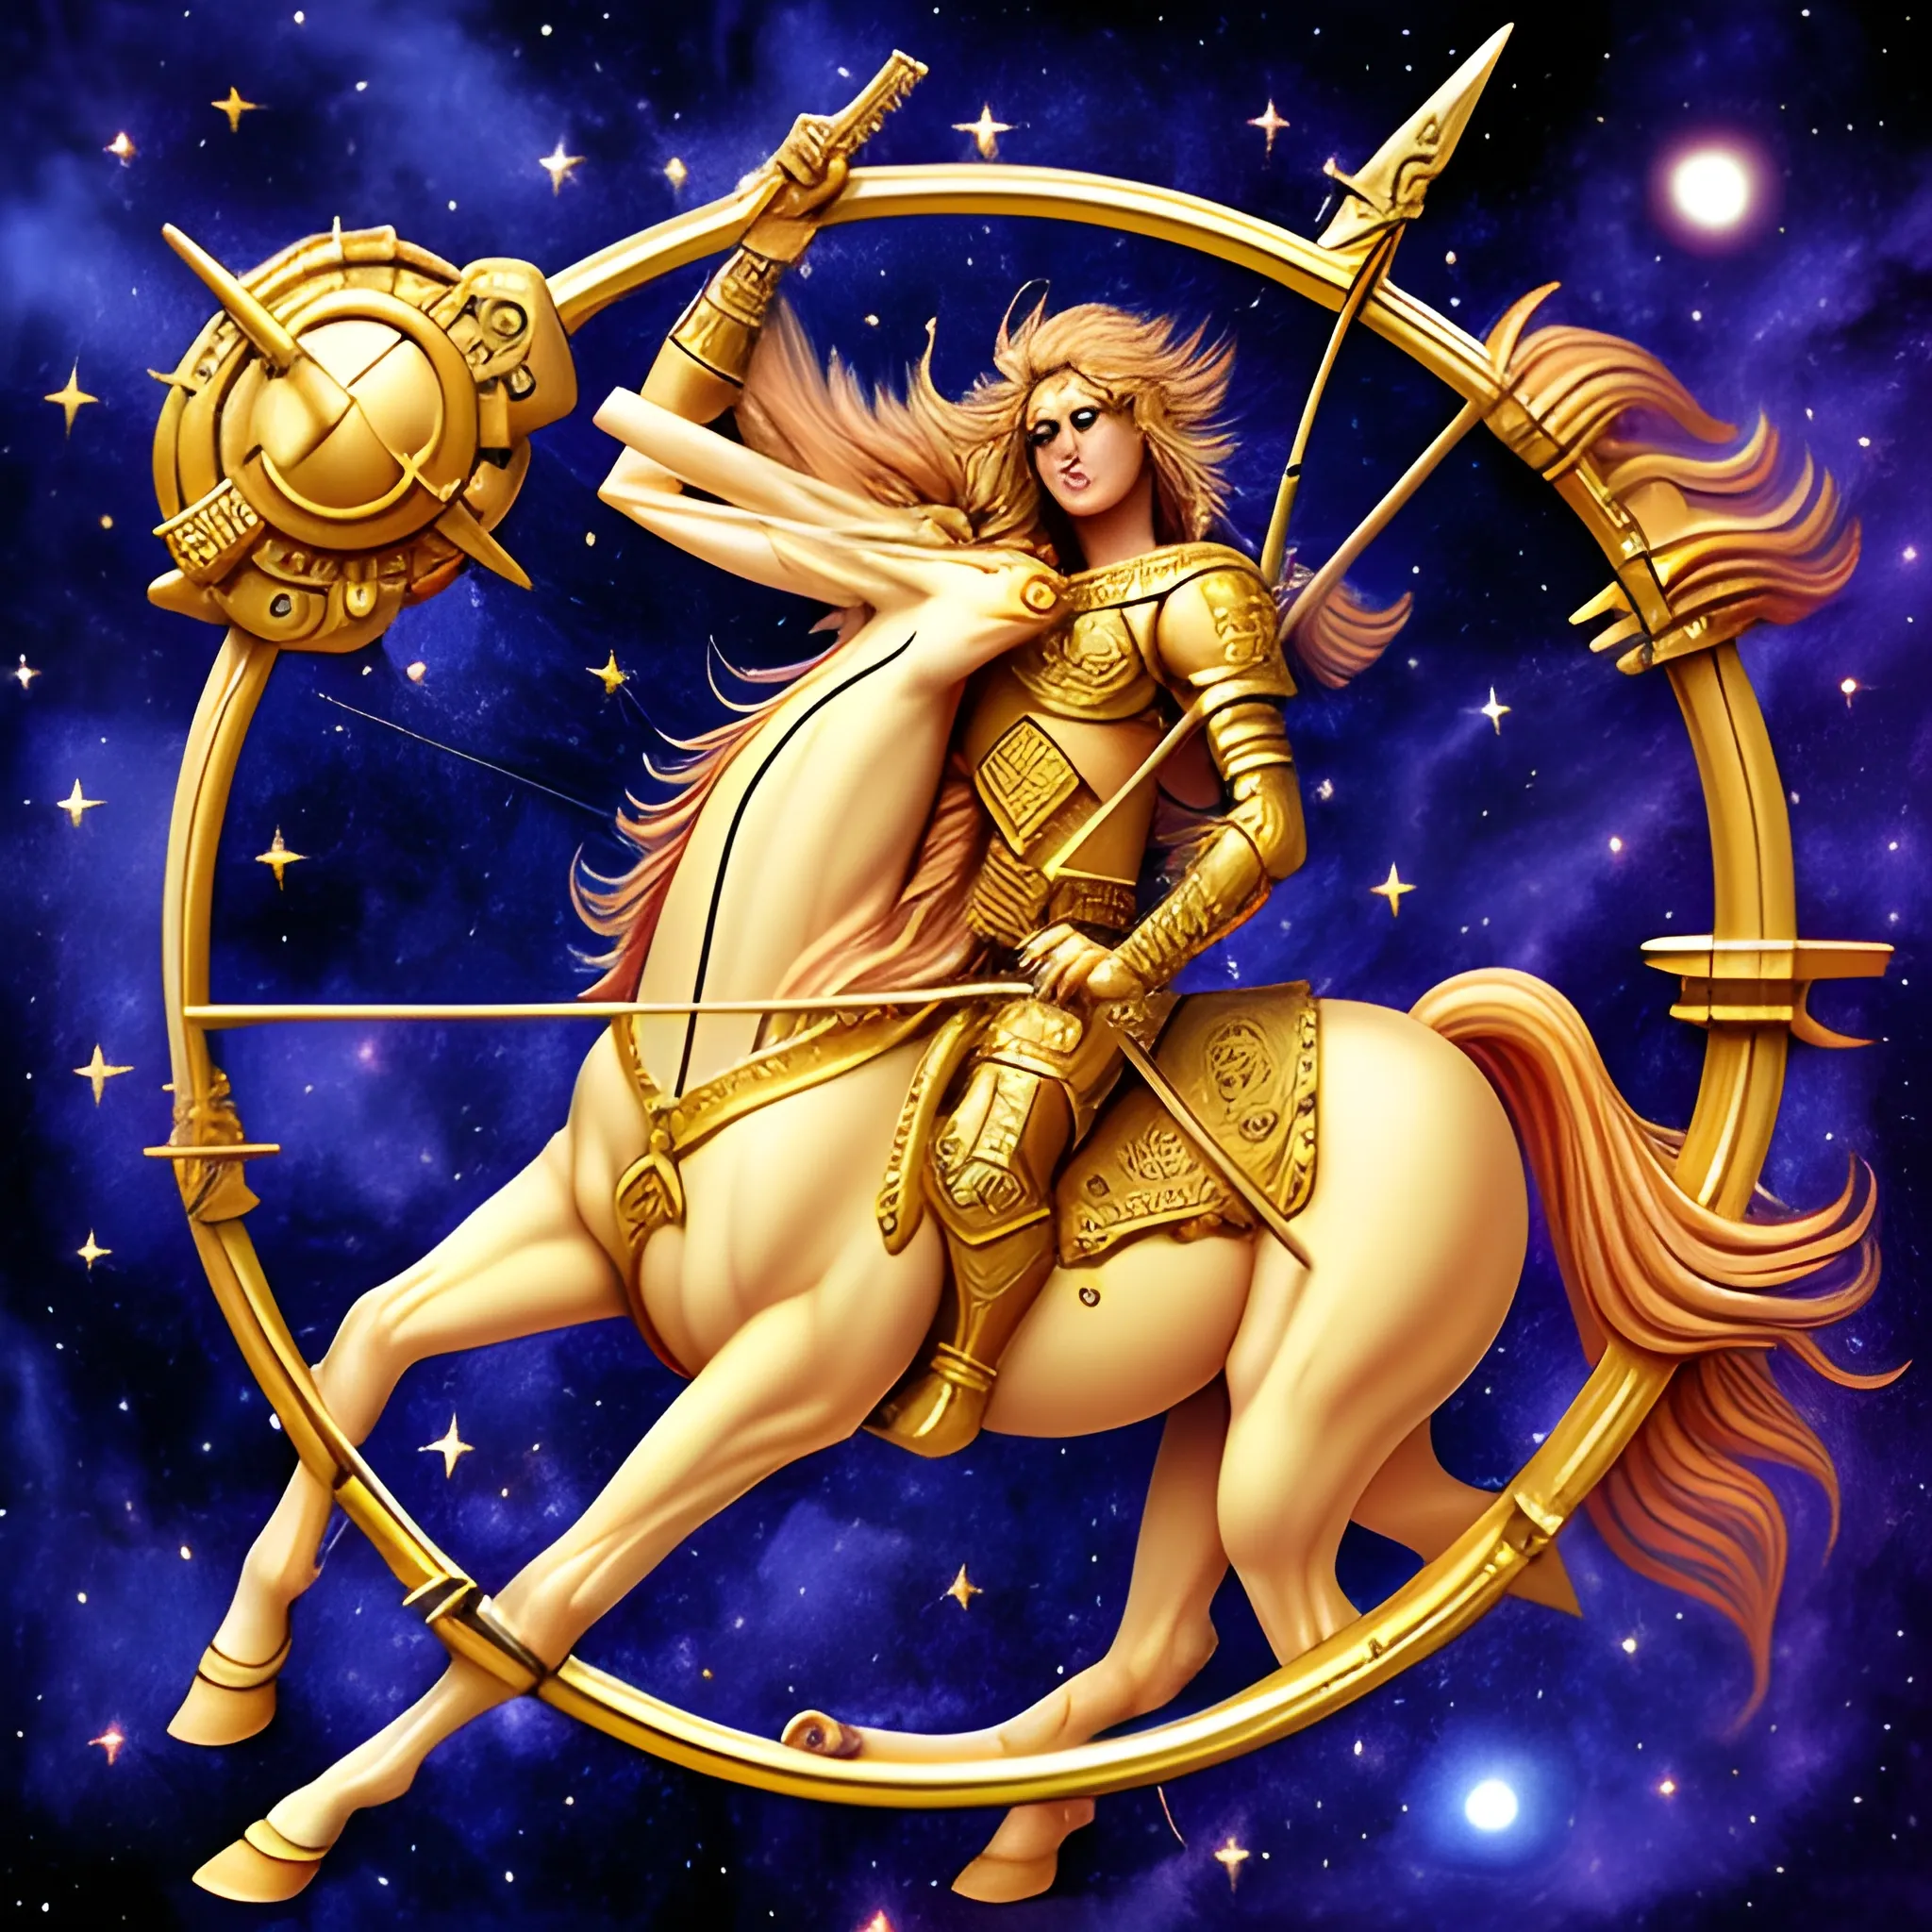 Universe fantasy art, Sagittarius sign realism style, detailed and complex, Etruscan fantasy art